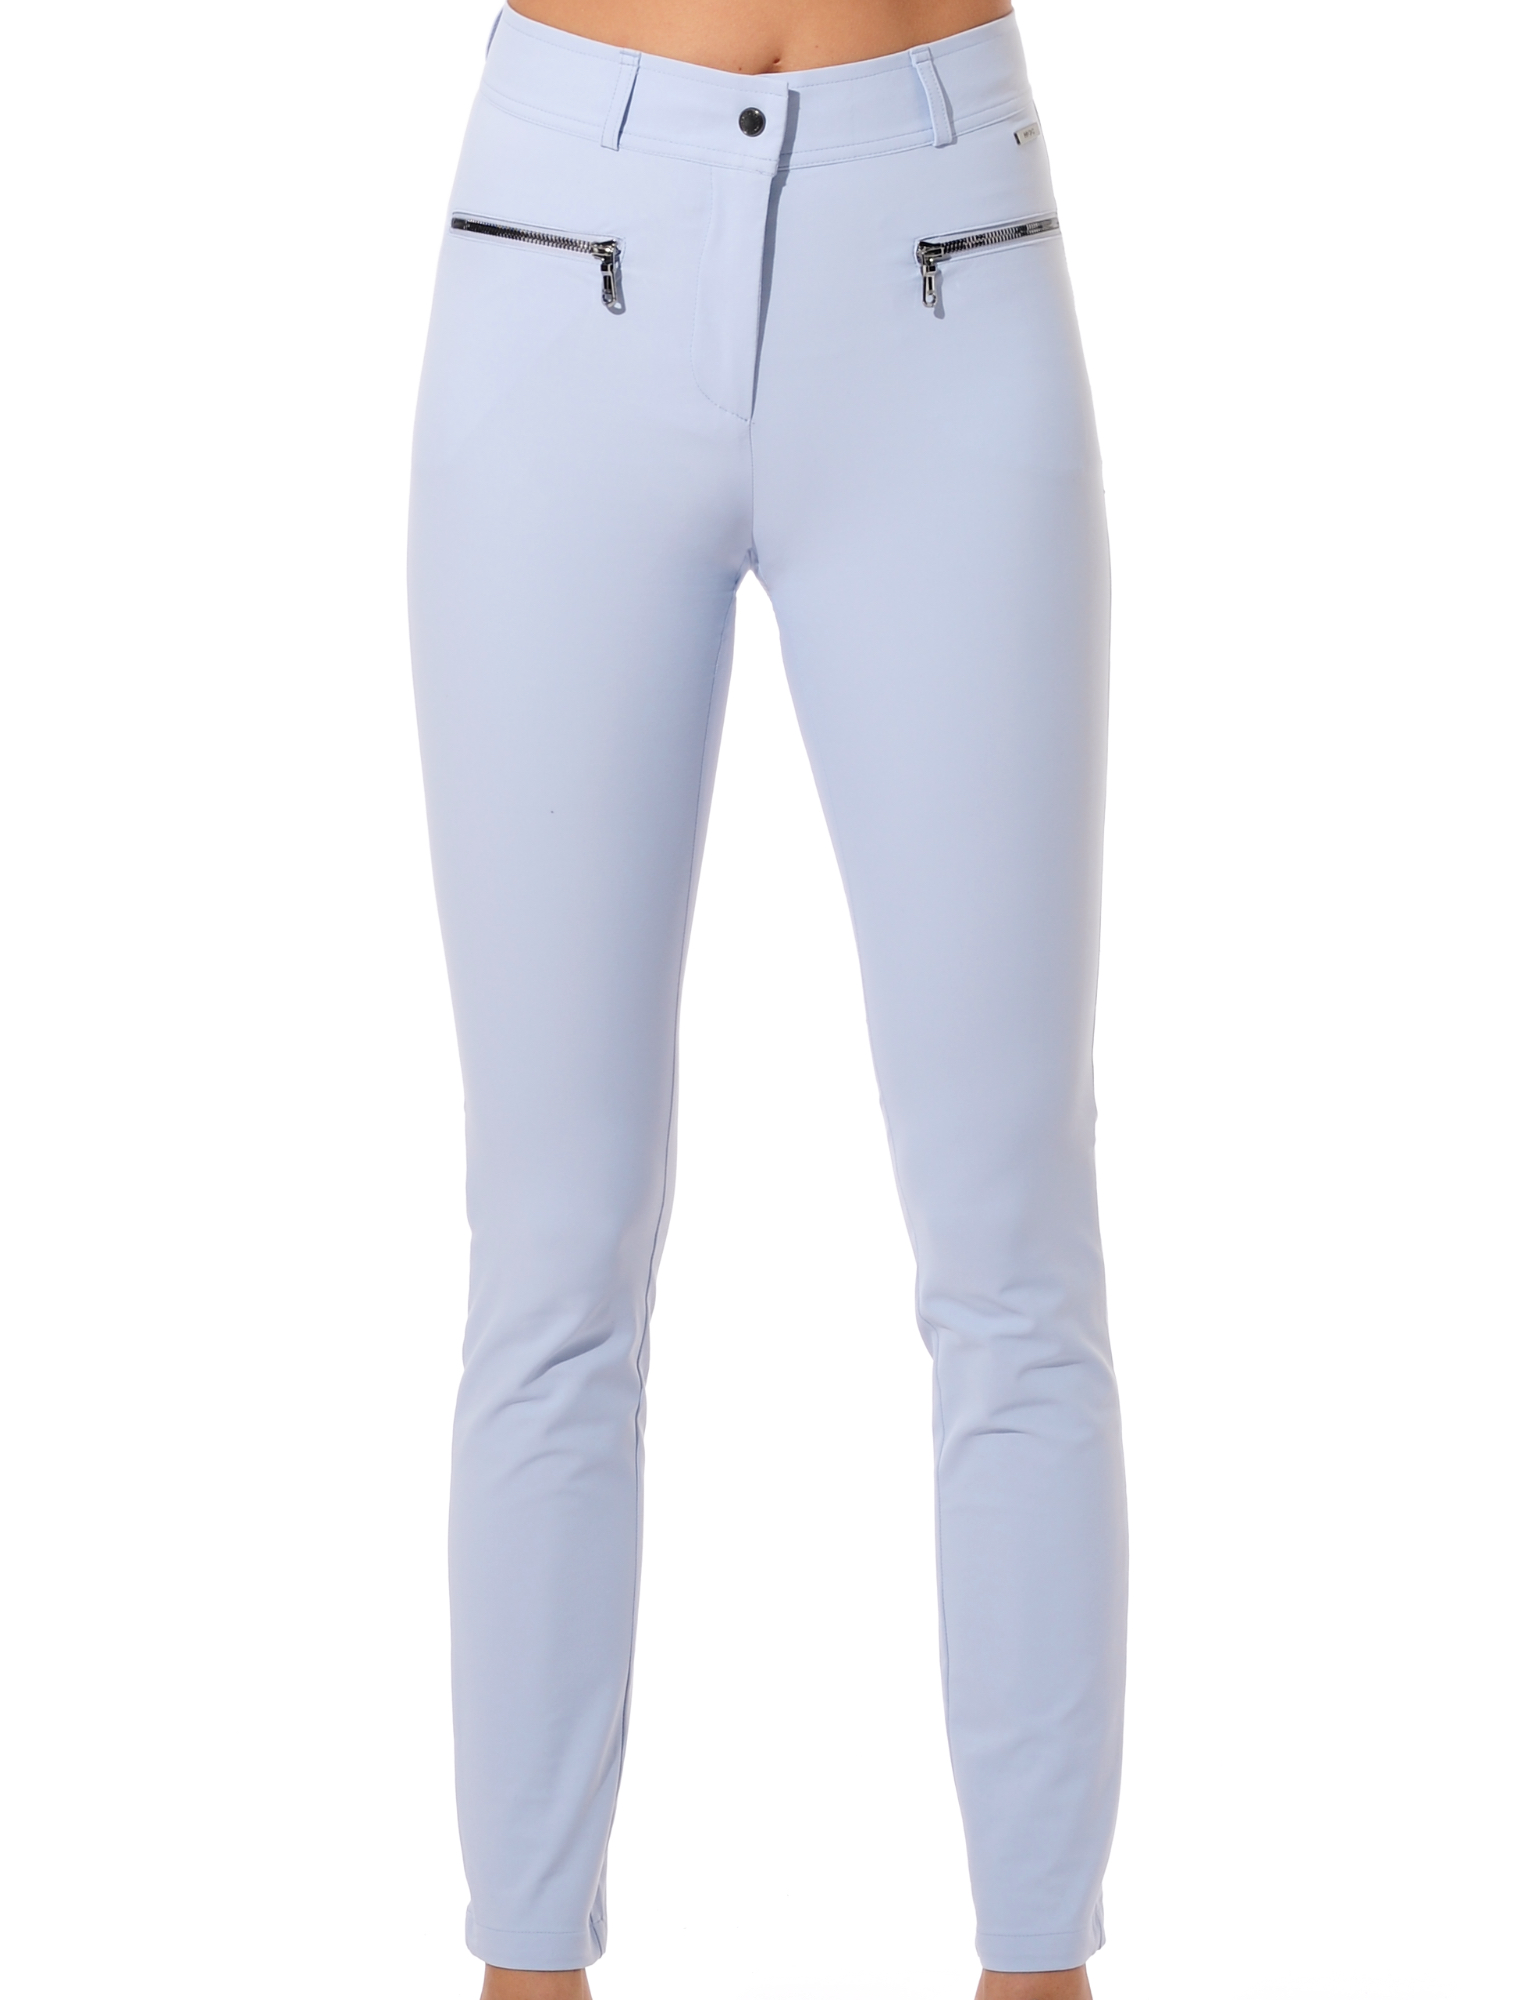 4way stretch jeggings cloud 